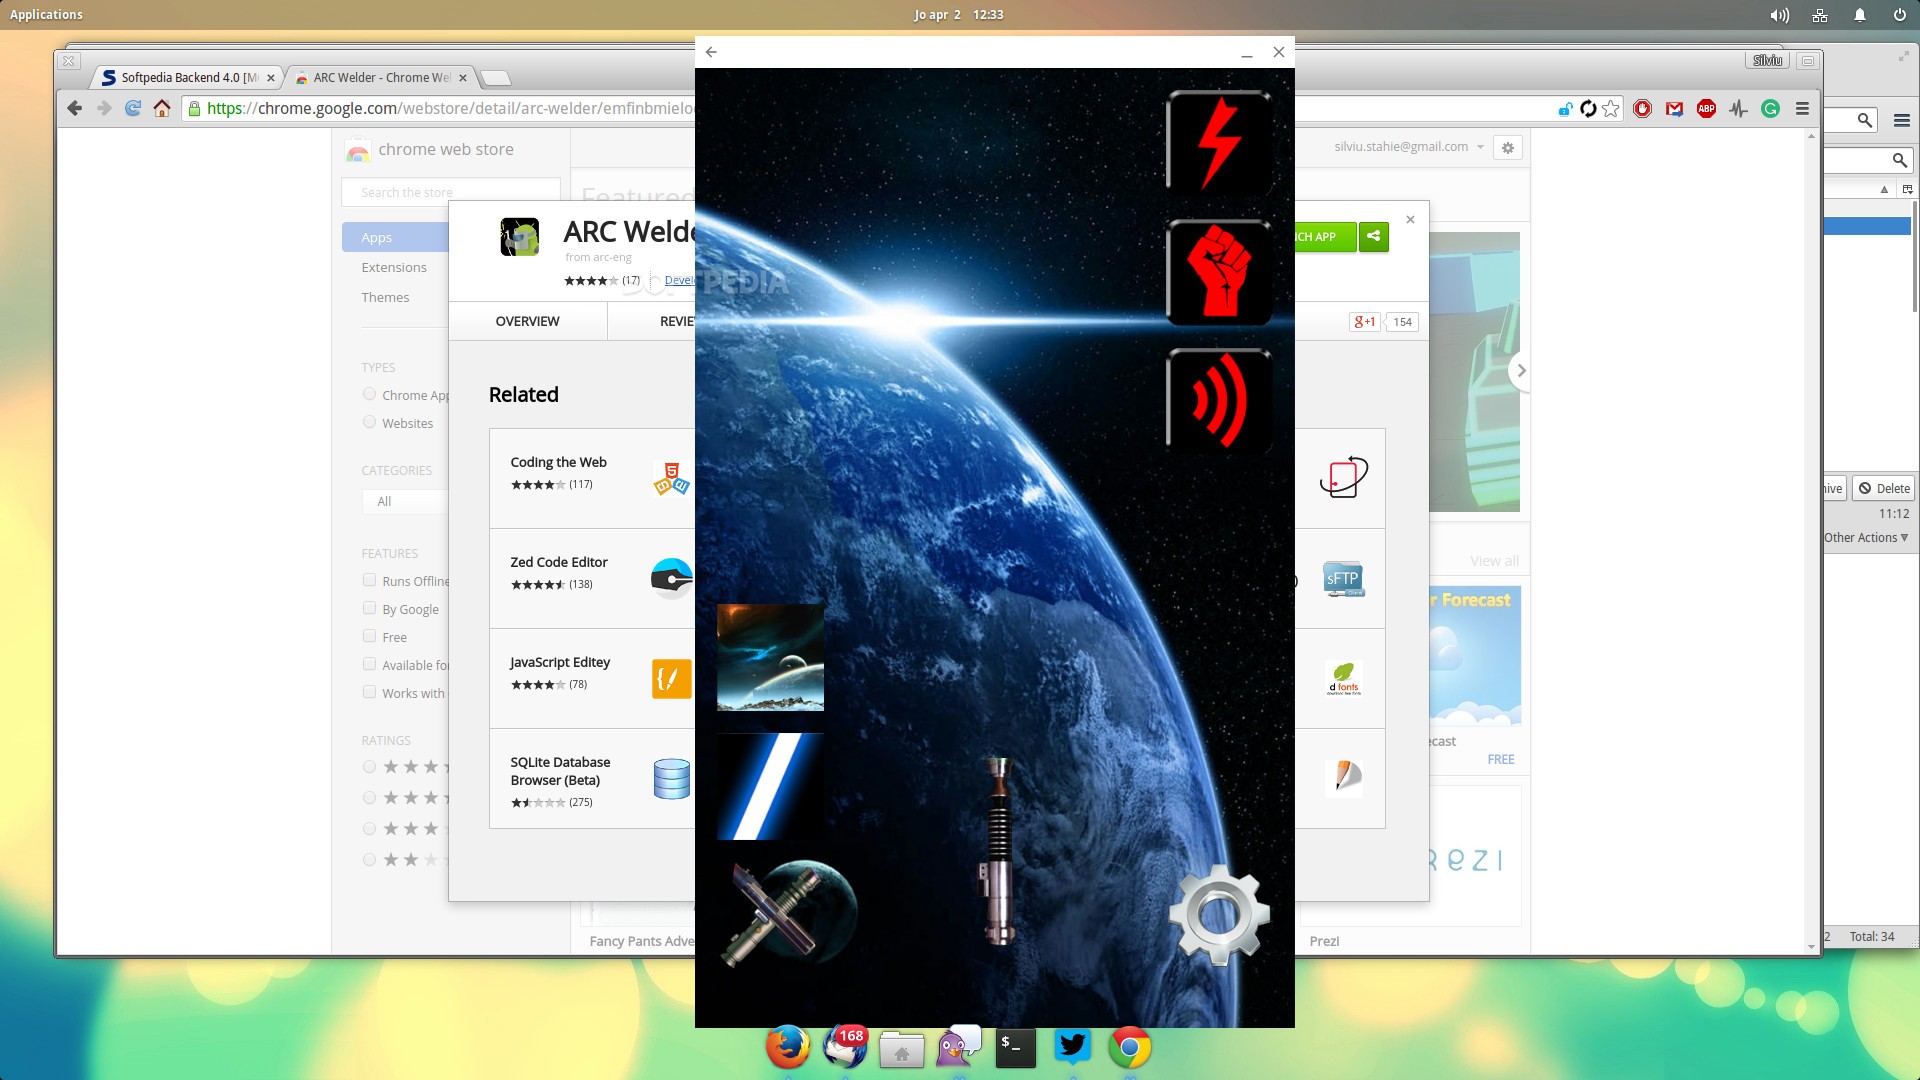 Android app running in elementary OS